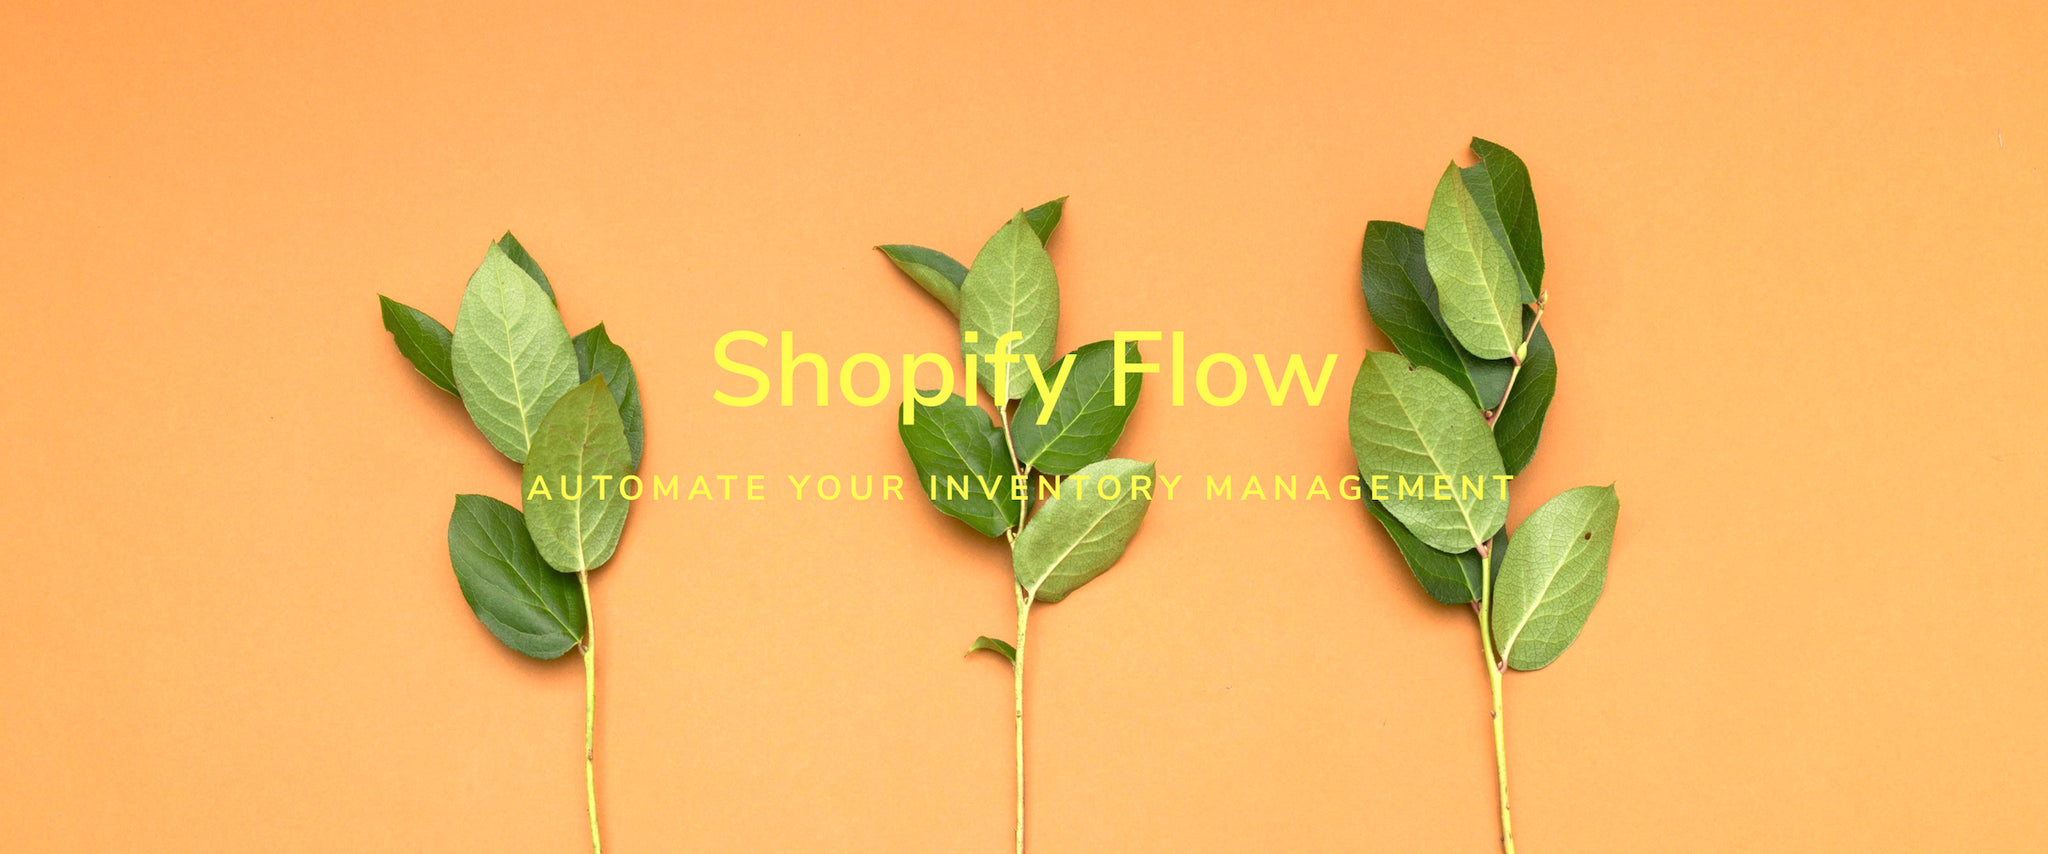 Use Flow to Automate Your Inventory Management and Reorder Low-Stock Products